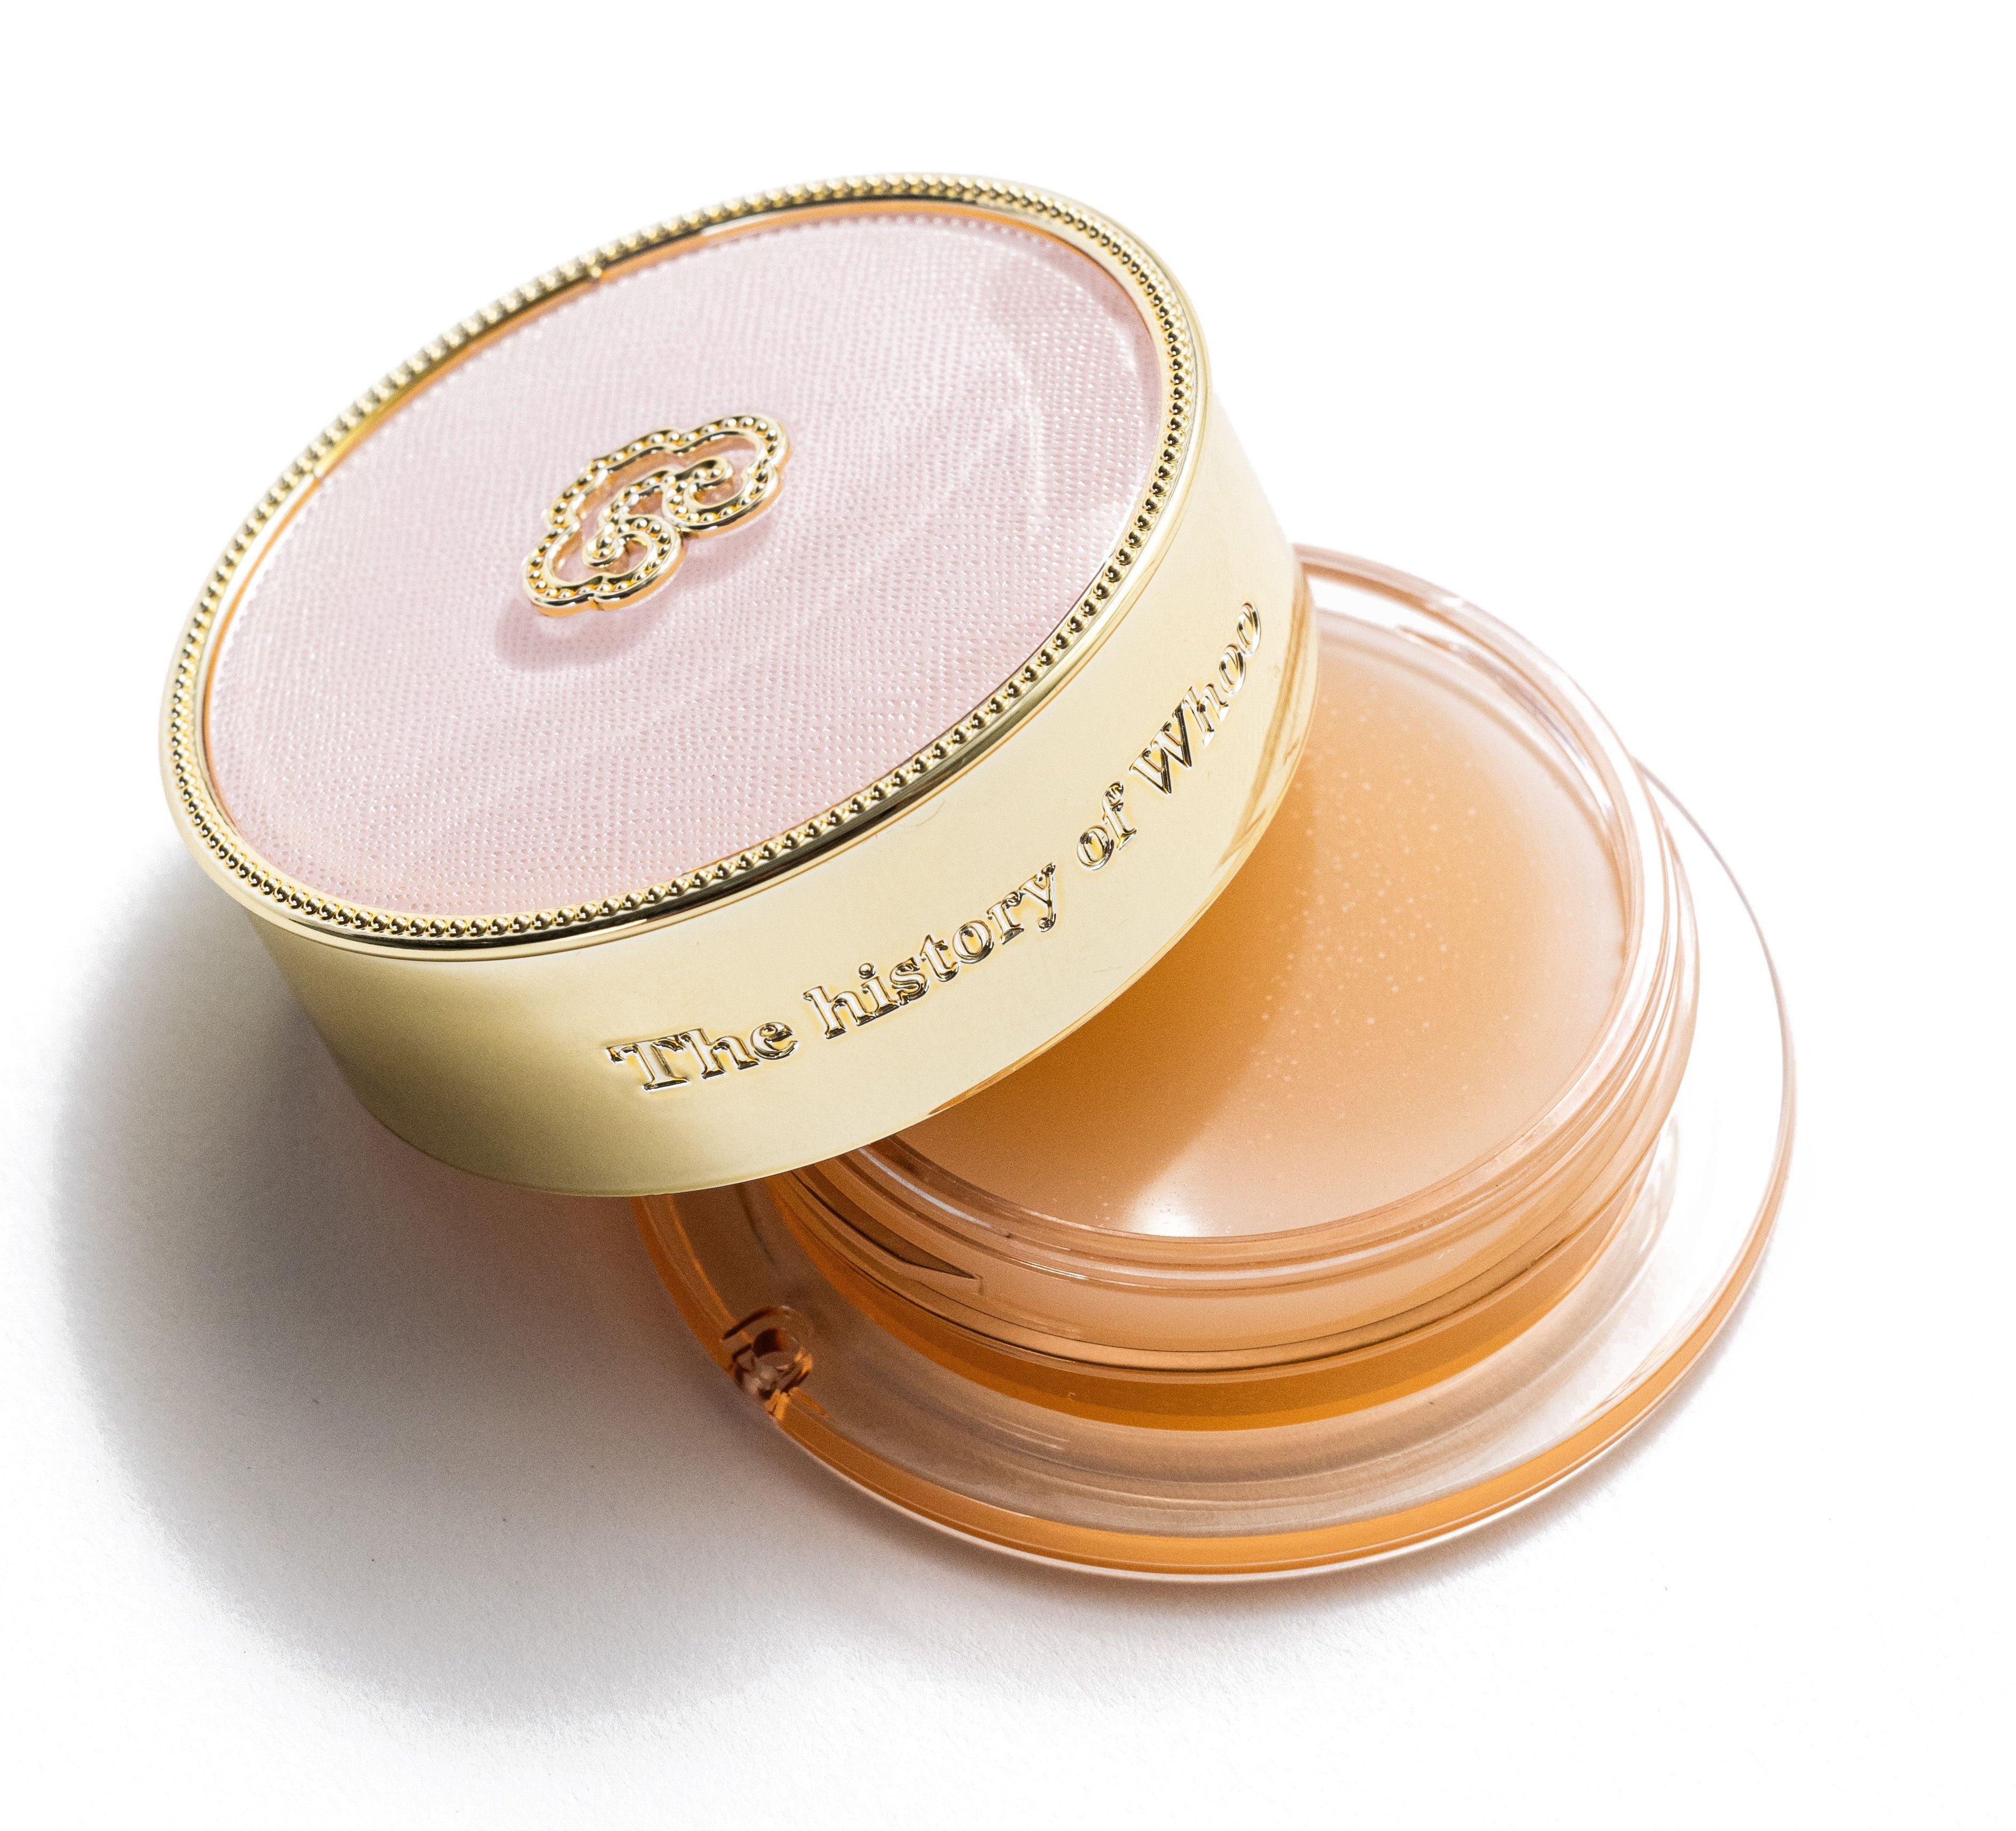 The History of Whoo Lip Balm